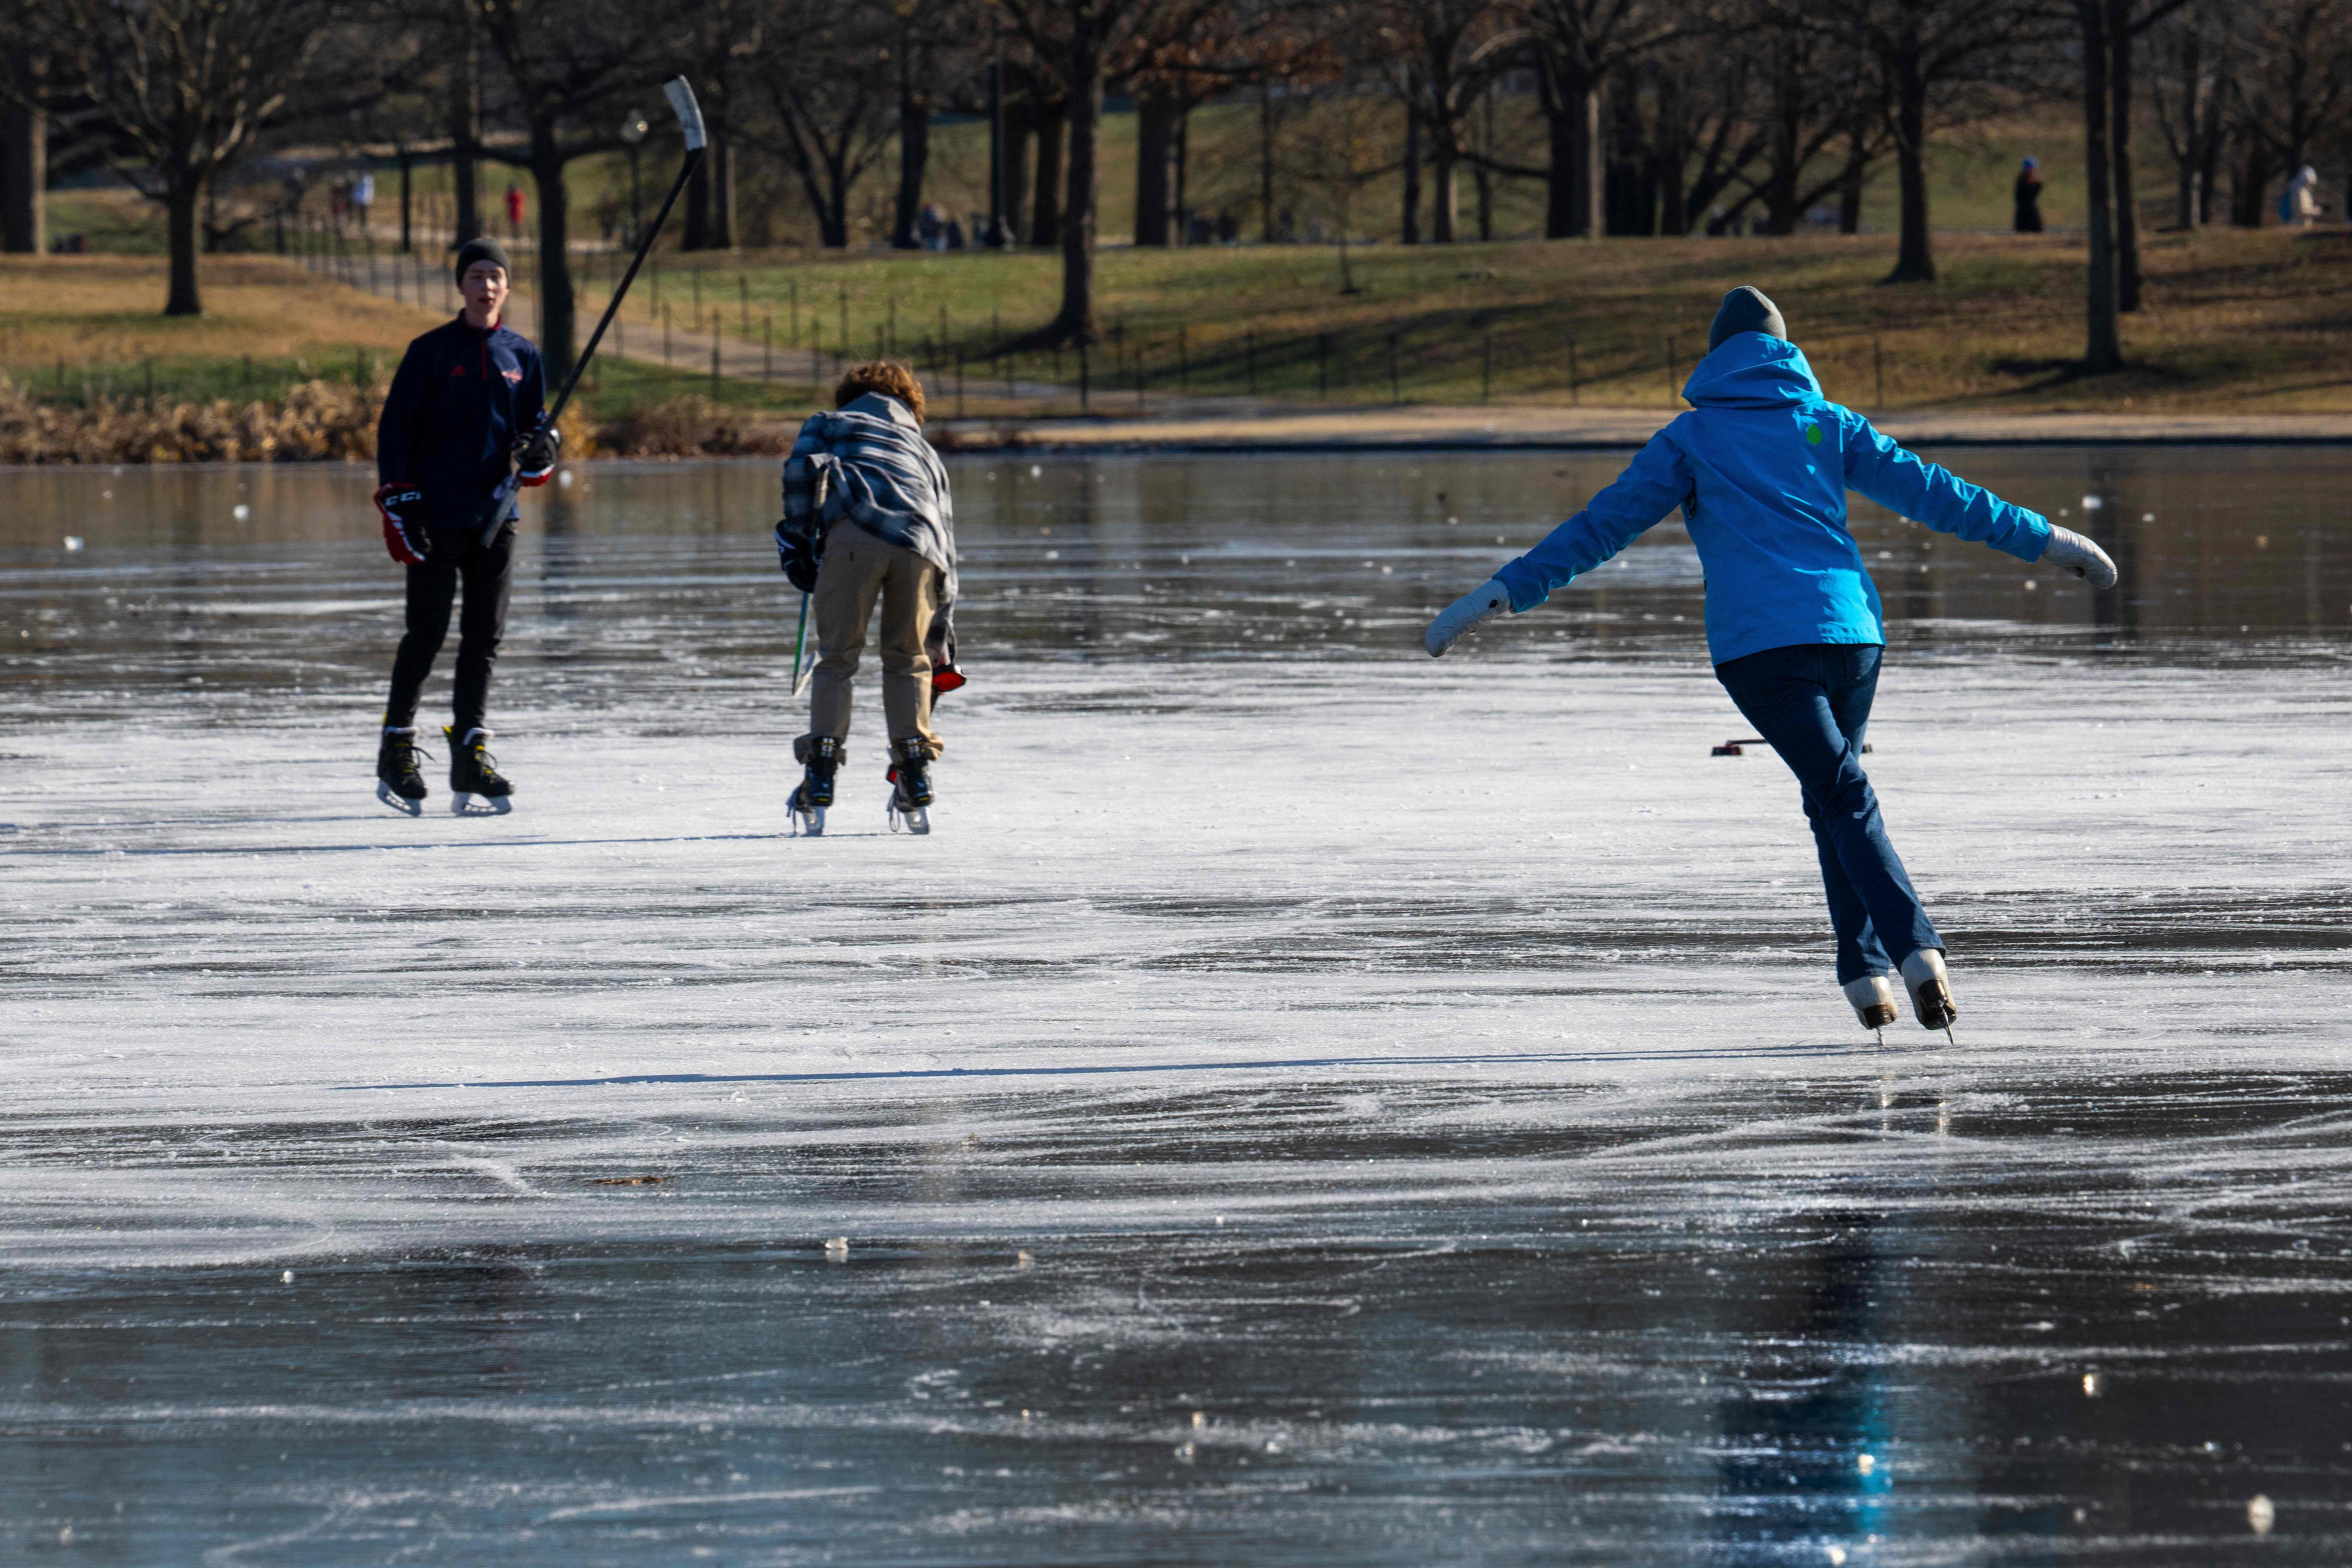 Local ponds and lakes pose risks for recreational ice skaters